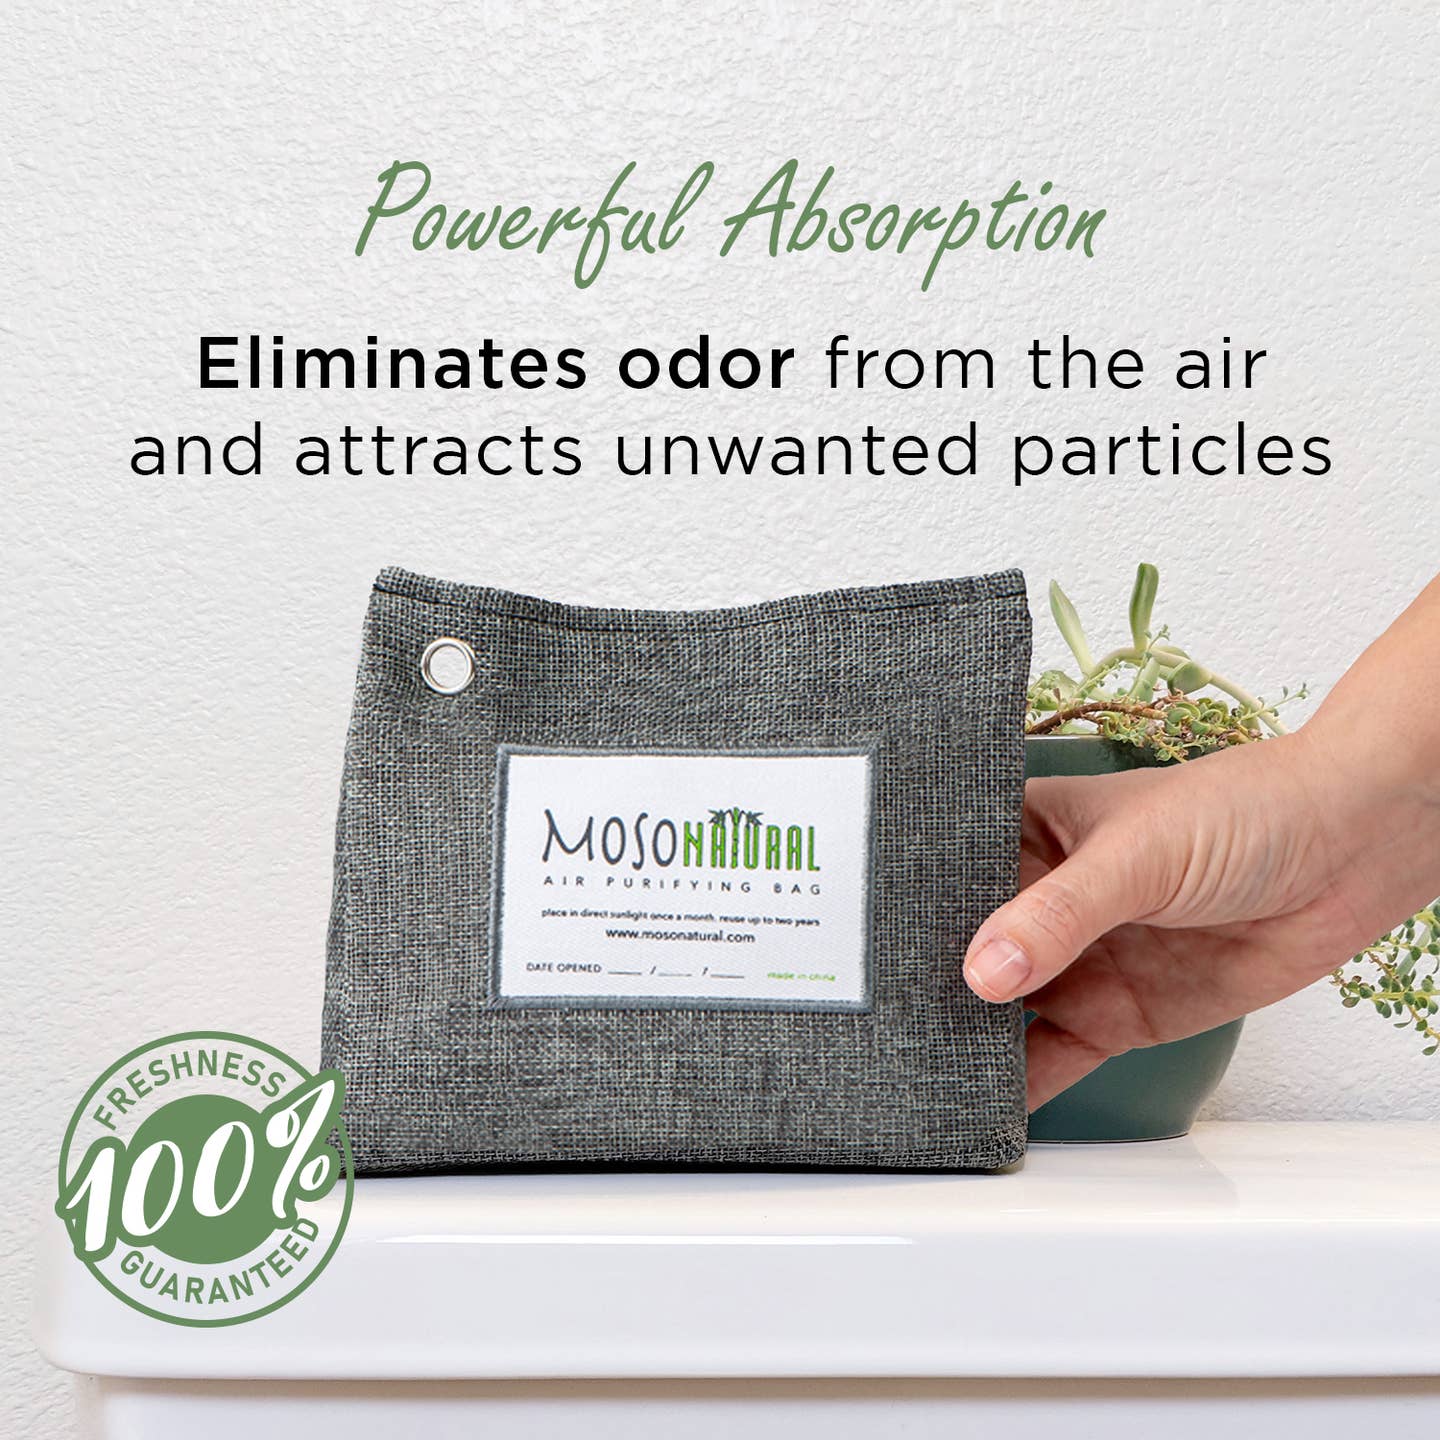 Moso Natural Air Purifying Bag For Small Spaces - 300 Gram